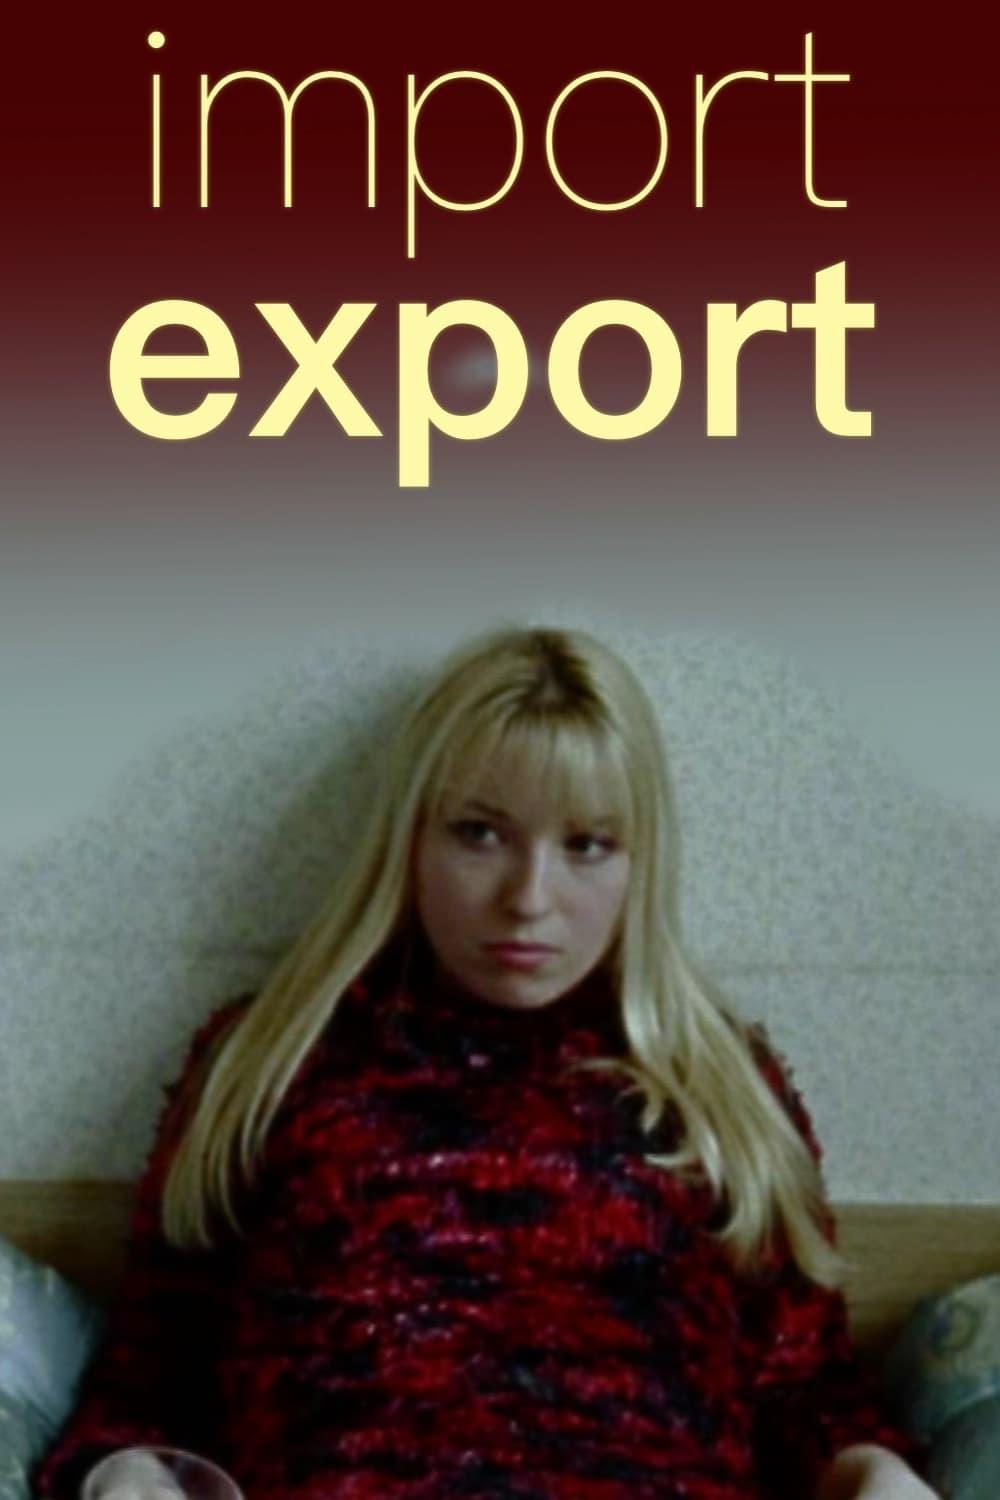 Import/Export poster